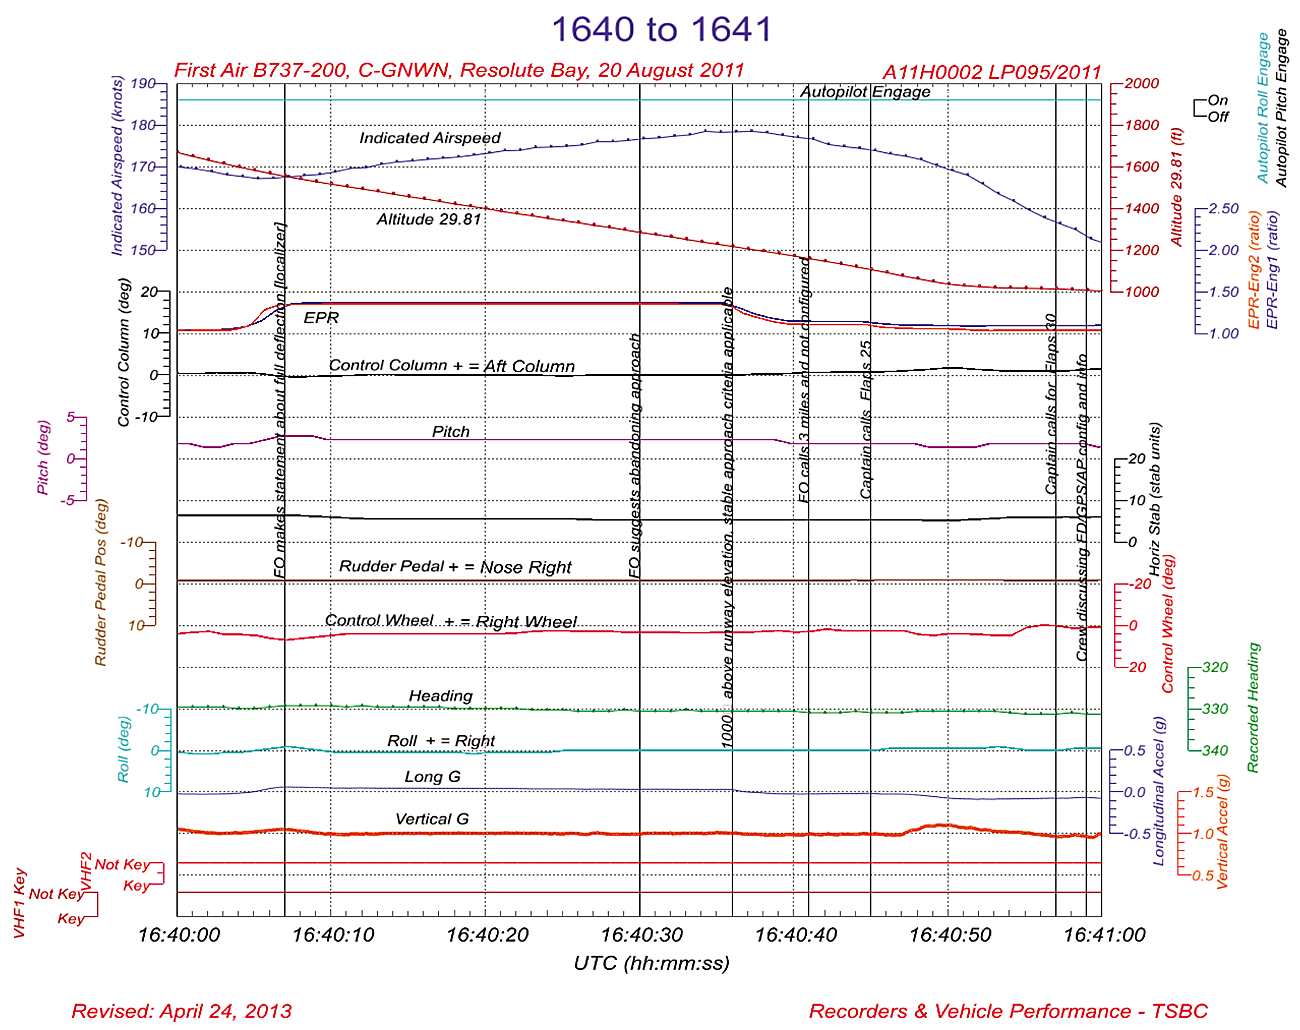 Appendix L. Sequence of events: 1640 to 1641